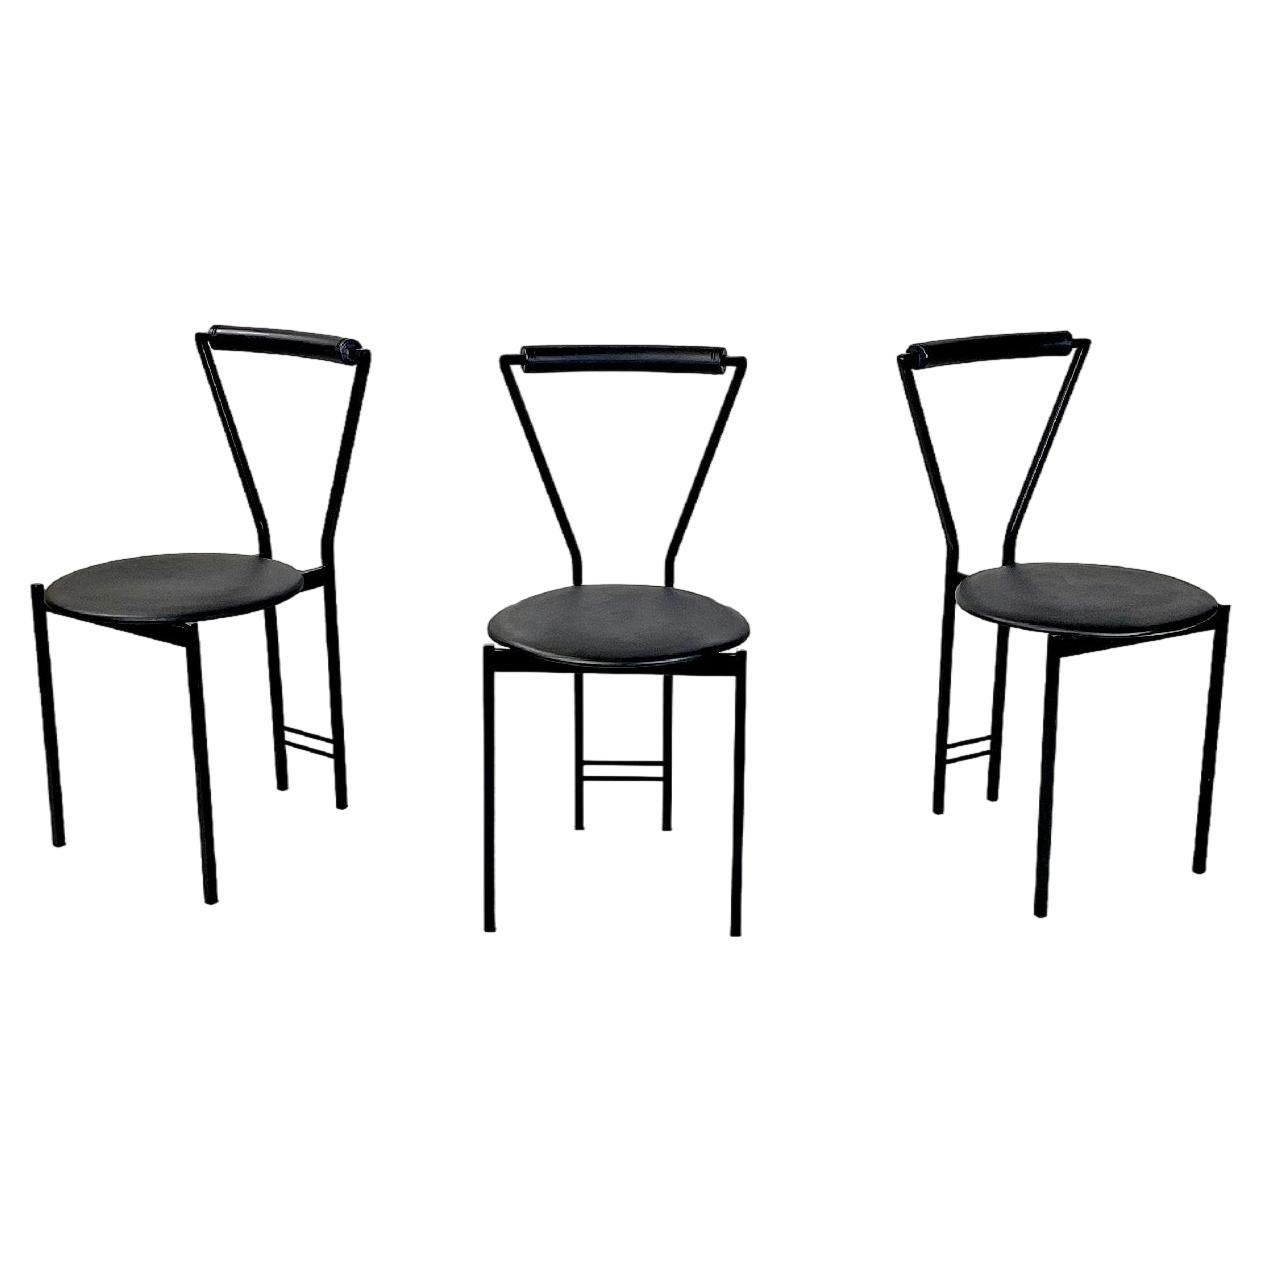 Italian modern chairs in black metal and rubber, 1980s For Sale